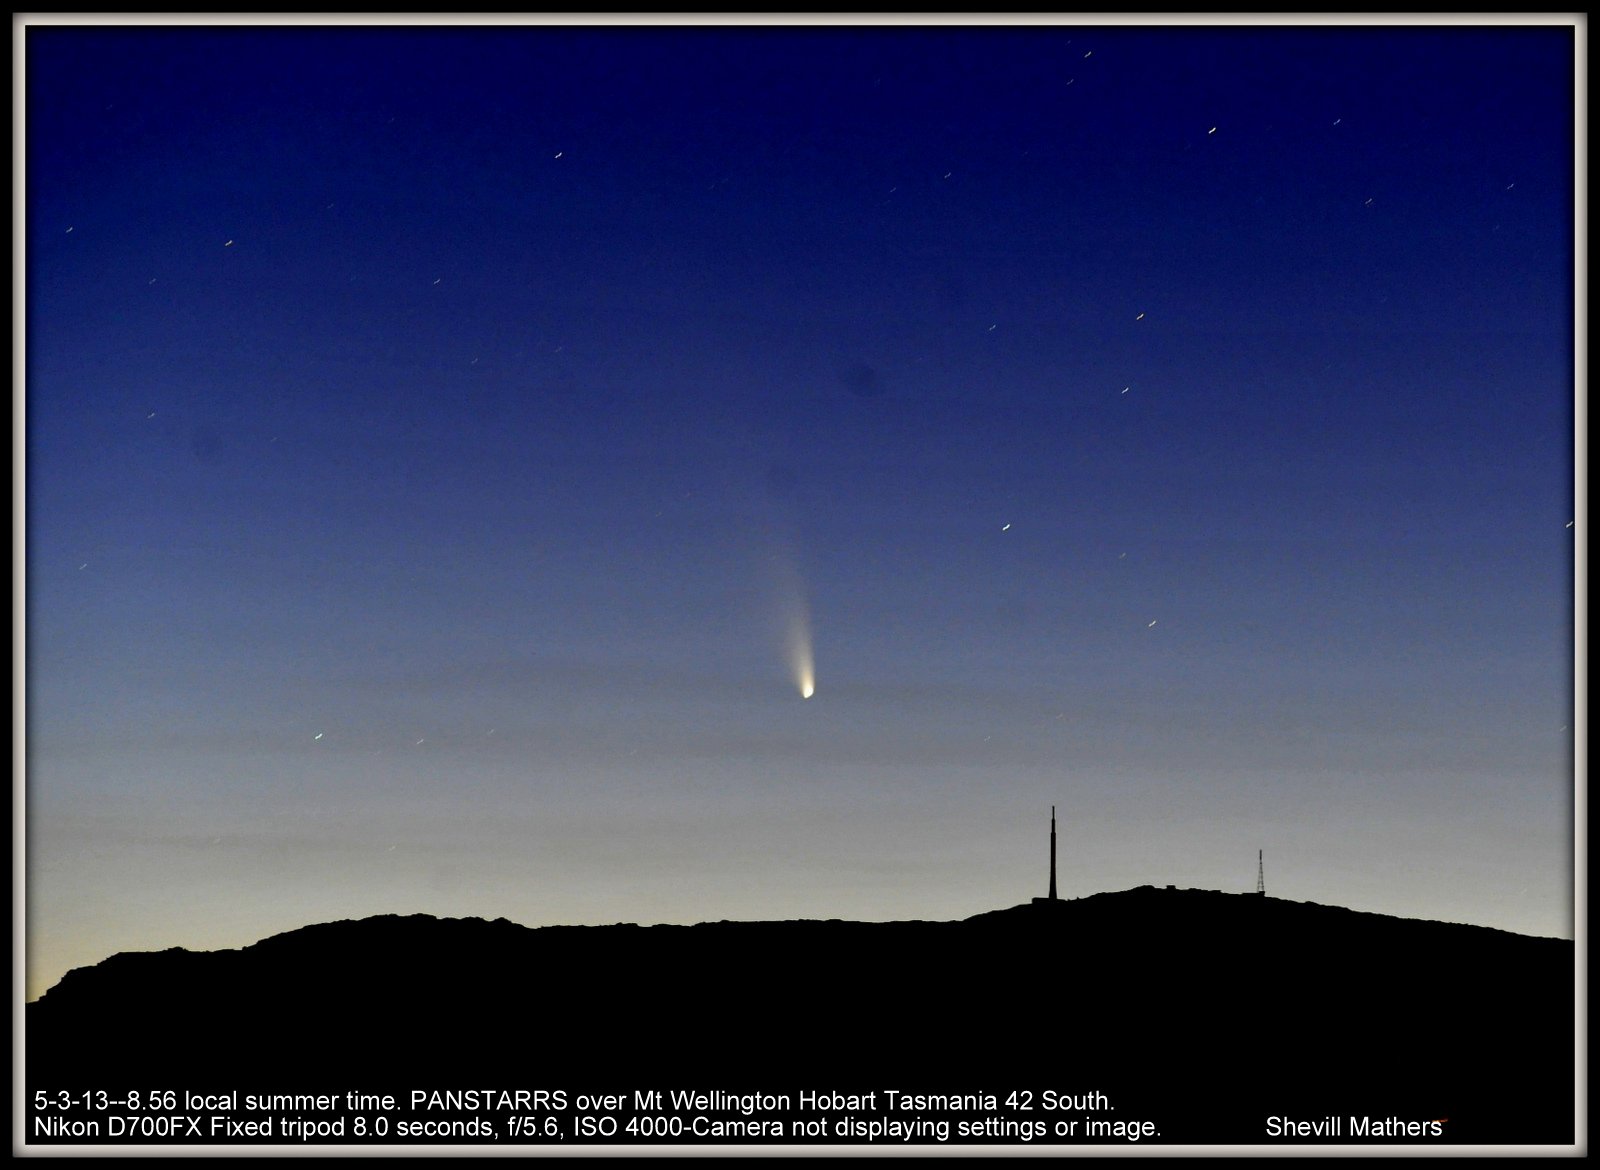 Comet PANSTARRS Courtesy of Shevill Mathers March 5, 2013